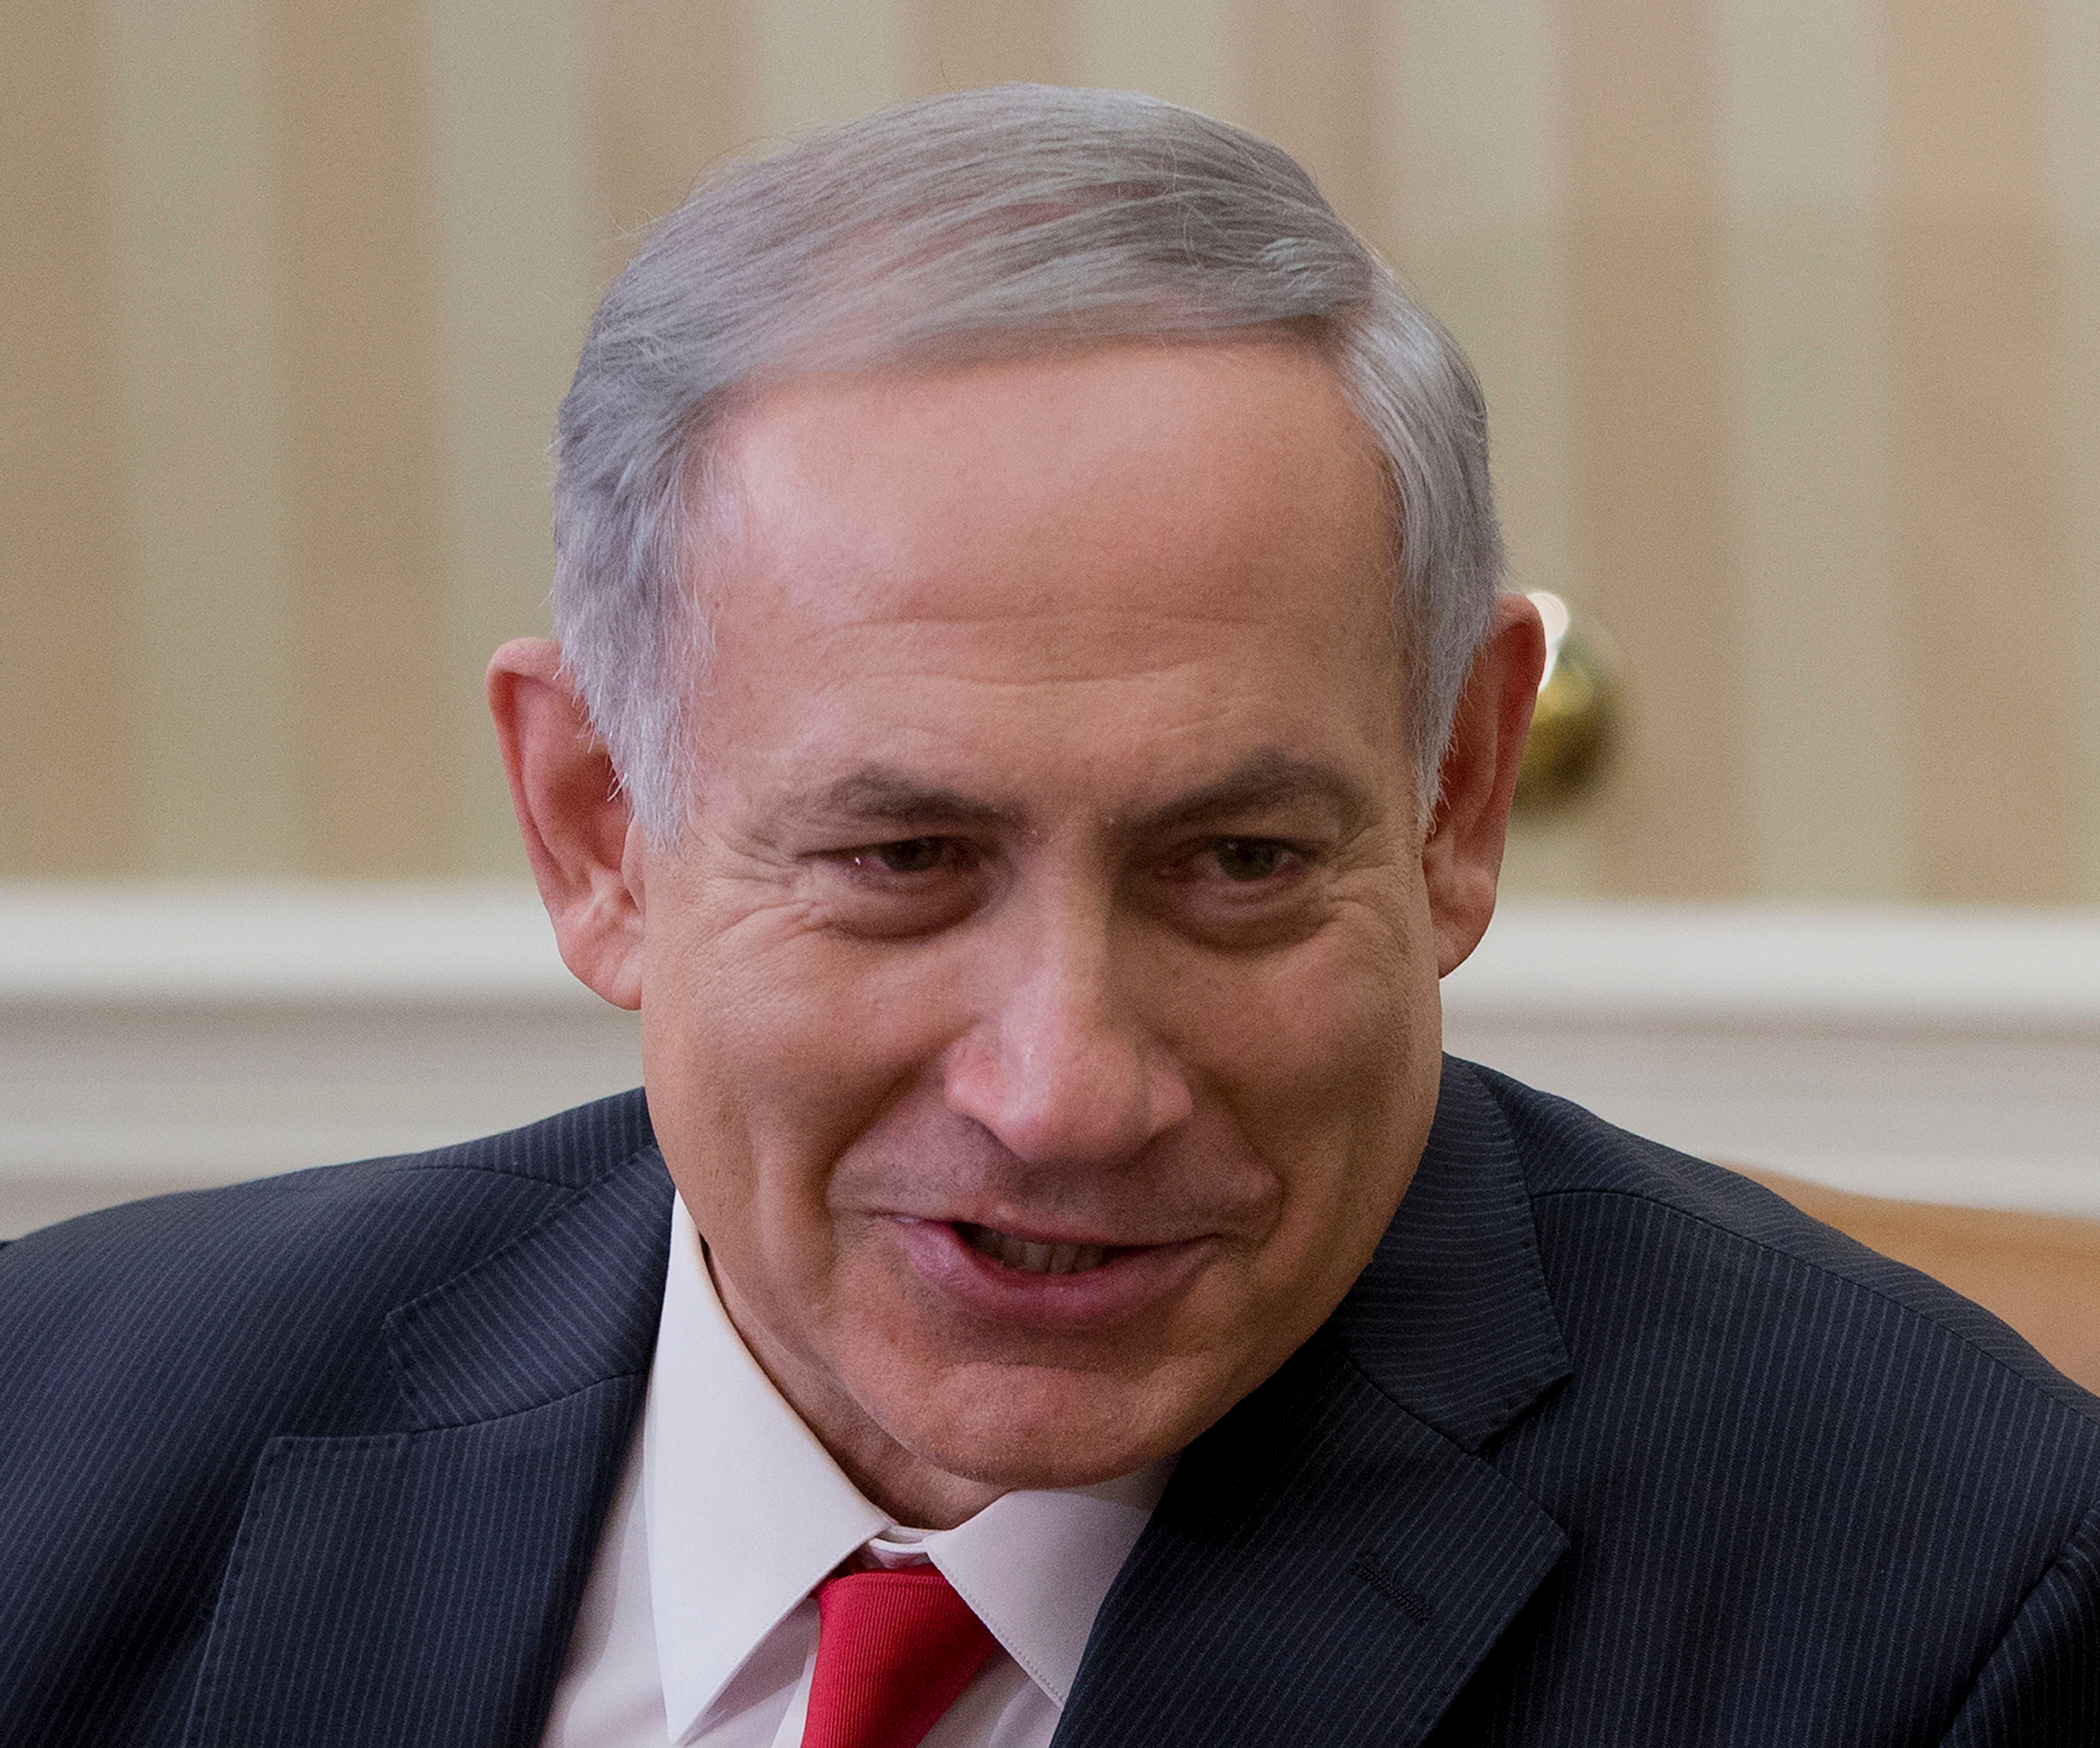 Netanyahu calls on Abbas to recognize Israel as the Jewish state | Fox News